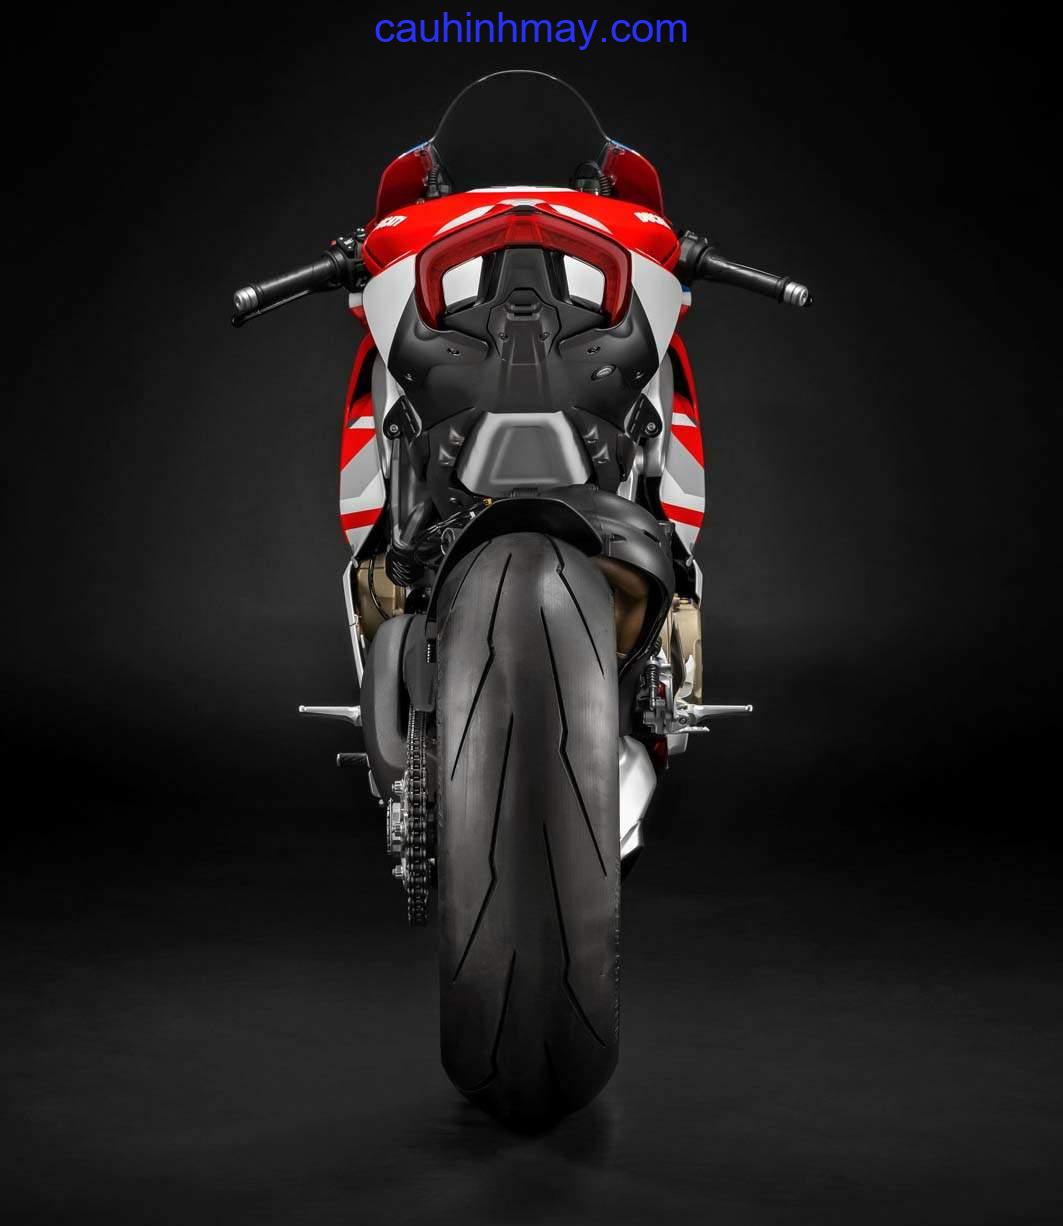 DUCATI PANIGALE V4S SPECIALE COURSE - cauhinhmay.com